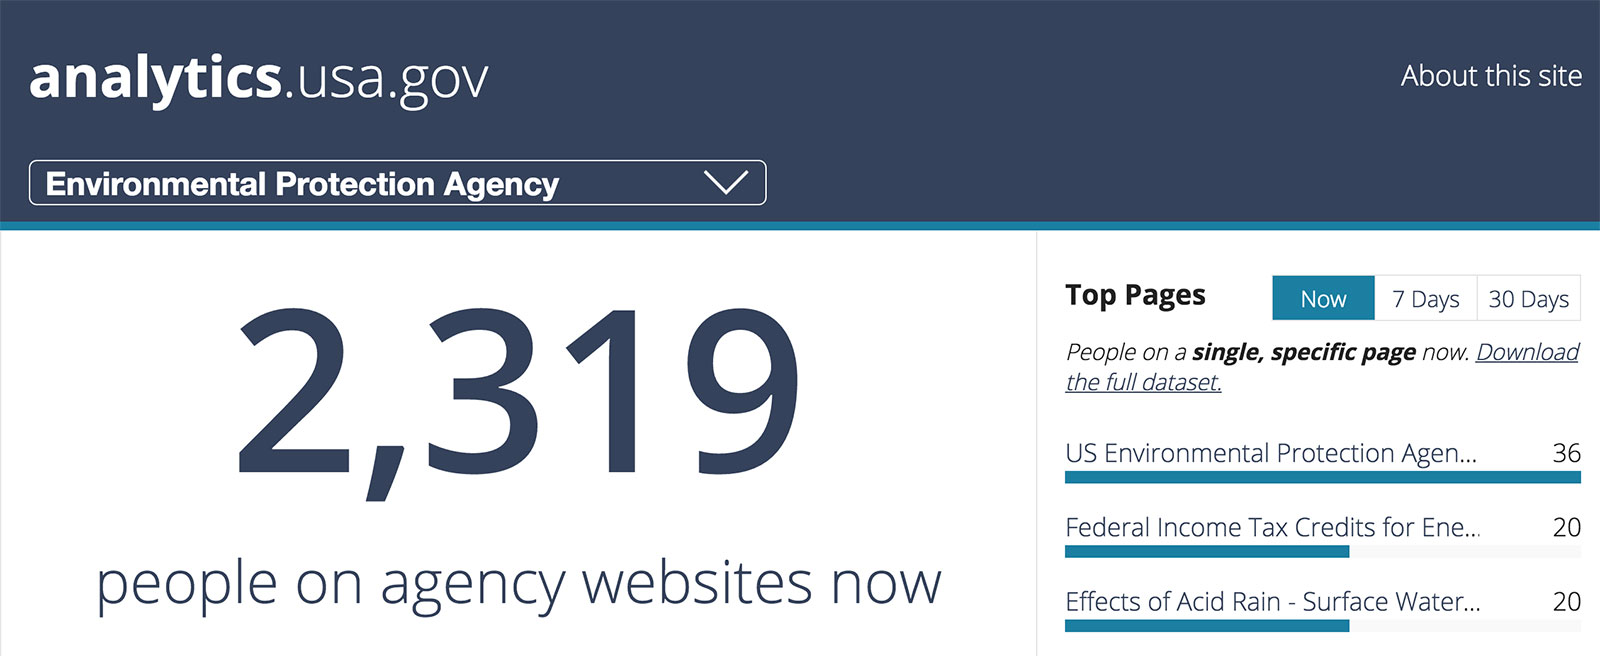 A screenshot of the Environmental Protection Agency's dashboard on analytics.usa.gov